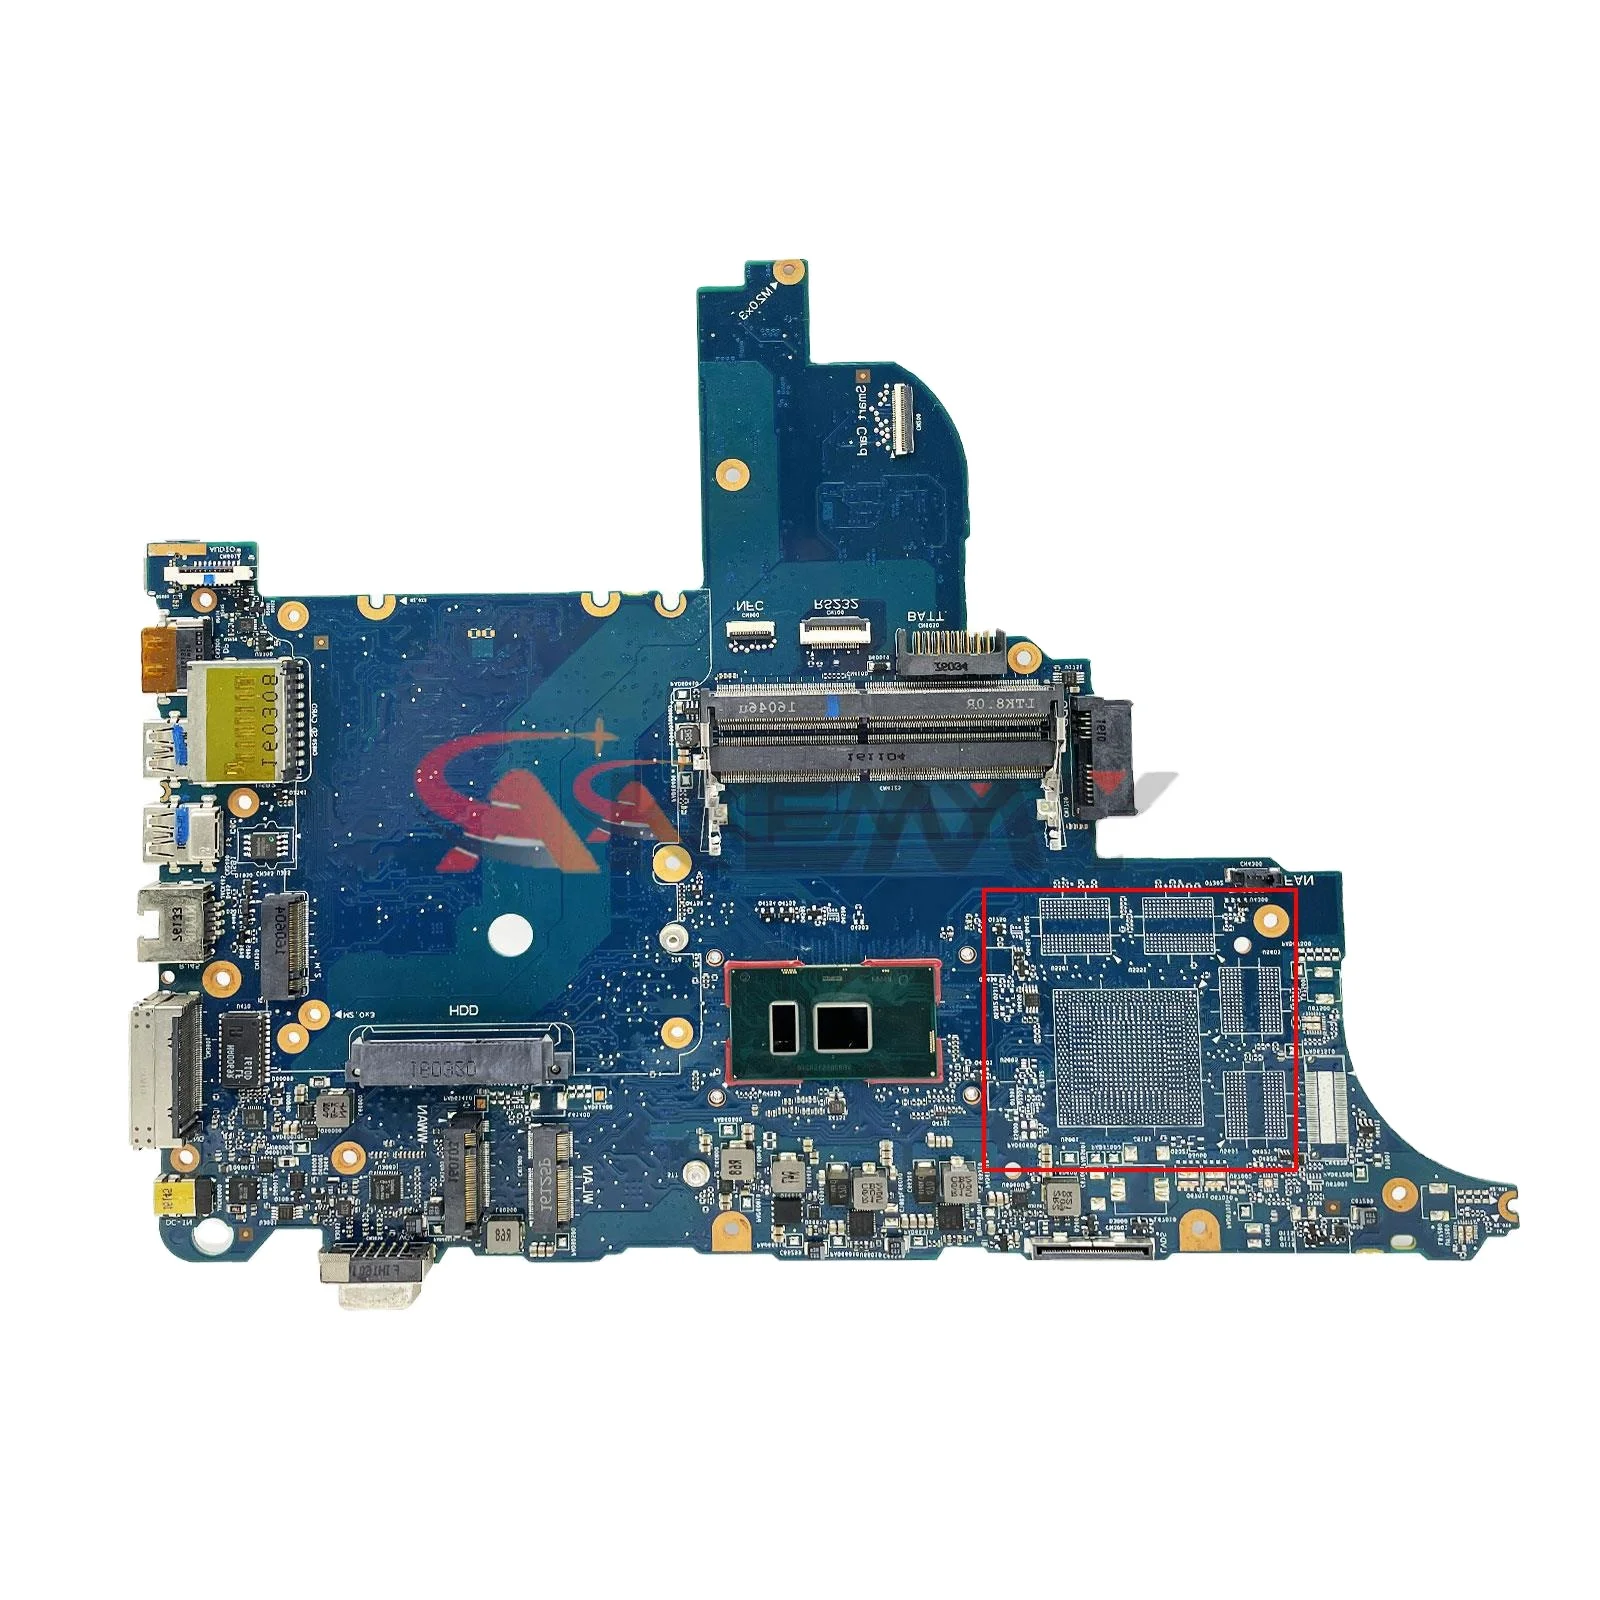 

6050A2723701 Mainboard For HP ProBook 640 G2 650 G2 Laptop Motherboard i3 i5 i7 CPU 852724-501 840715-601 840718-501 Keyboard